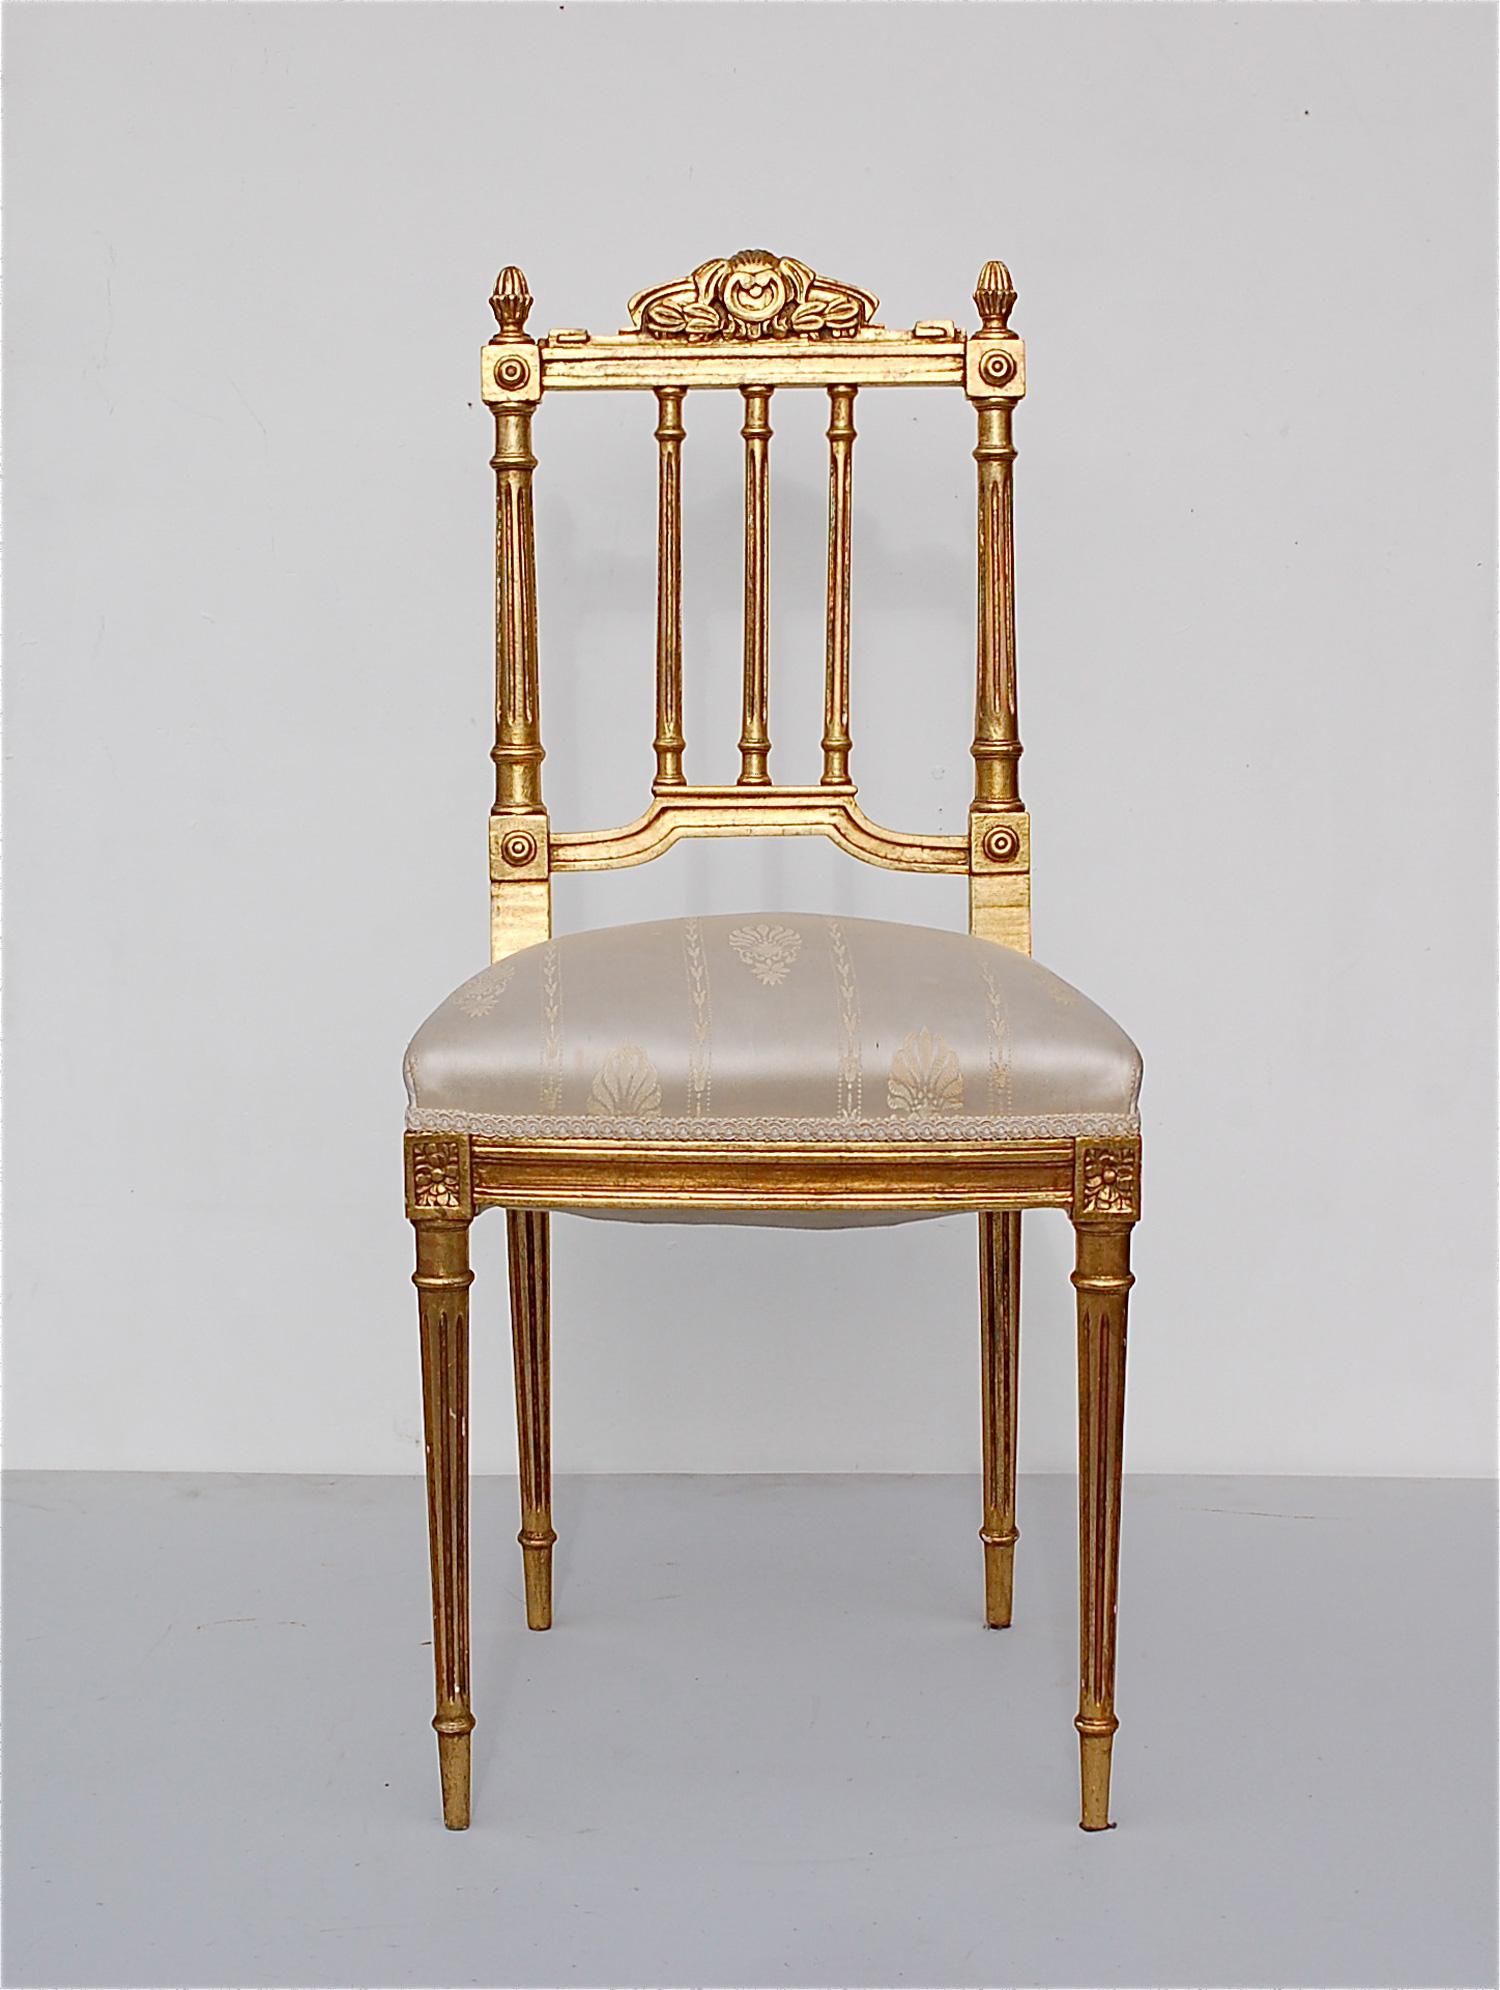 Giltwood accent, salon or boudoir chair designed in a French neoclassical, Louis XIV, Empire, Hollywood Regency style. It has a sprung seat that's upholstered in a cream white satin with a classic design motif. It's a solidly built chair, with a